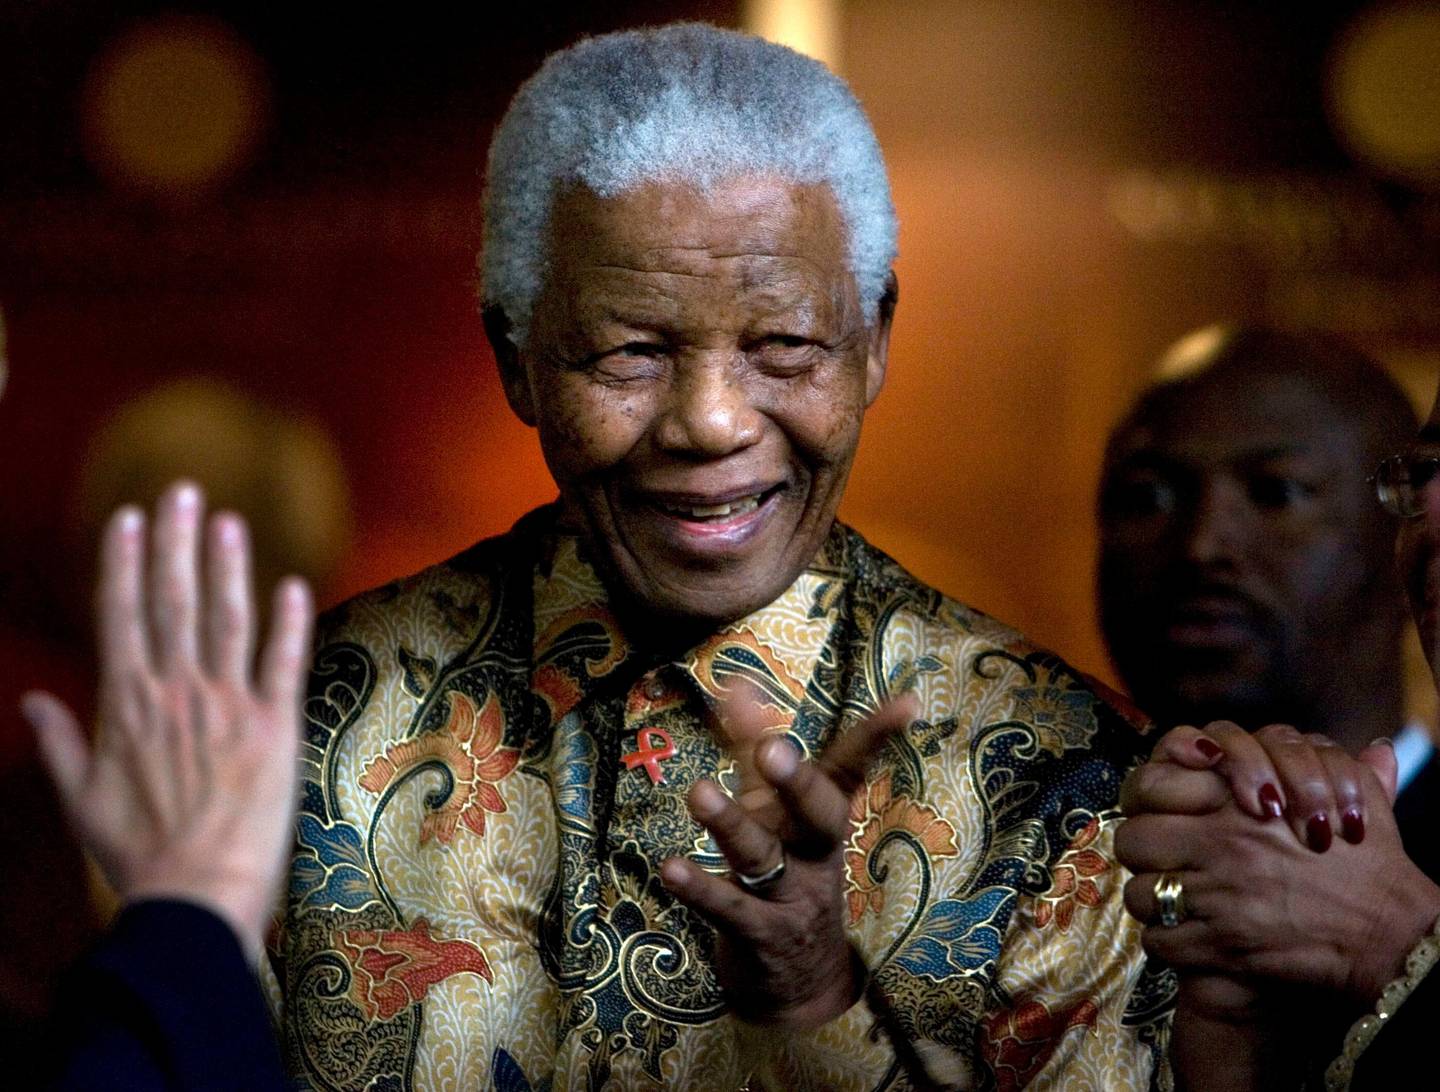 FILE - In this Oct. 6, 2007, file photo, former South African President Nelson Mandela reacts after a meeting at the Nelson Mandela Foundation building in Johannesburg, South Africa. The centennial of Mandela's birth is July 18, and those wishing to make a pilgrimage to honor his legacy will find a number of sites around South Africa, from the villages of his childhood to museums and historic sites about apartheid. (AP Photo/Peter Dejong, File)